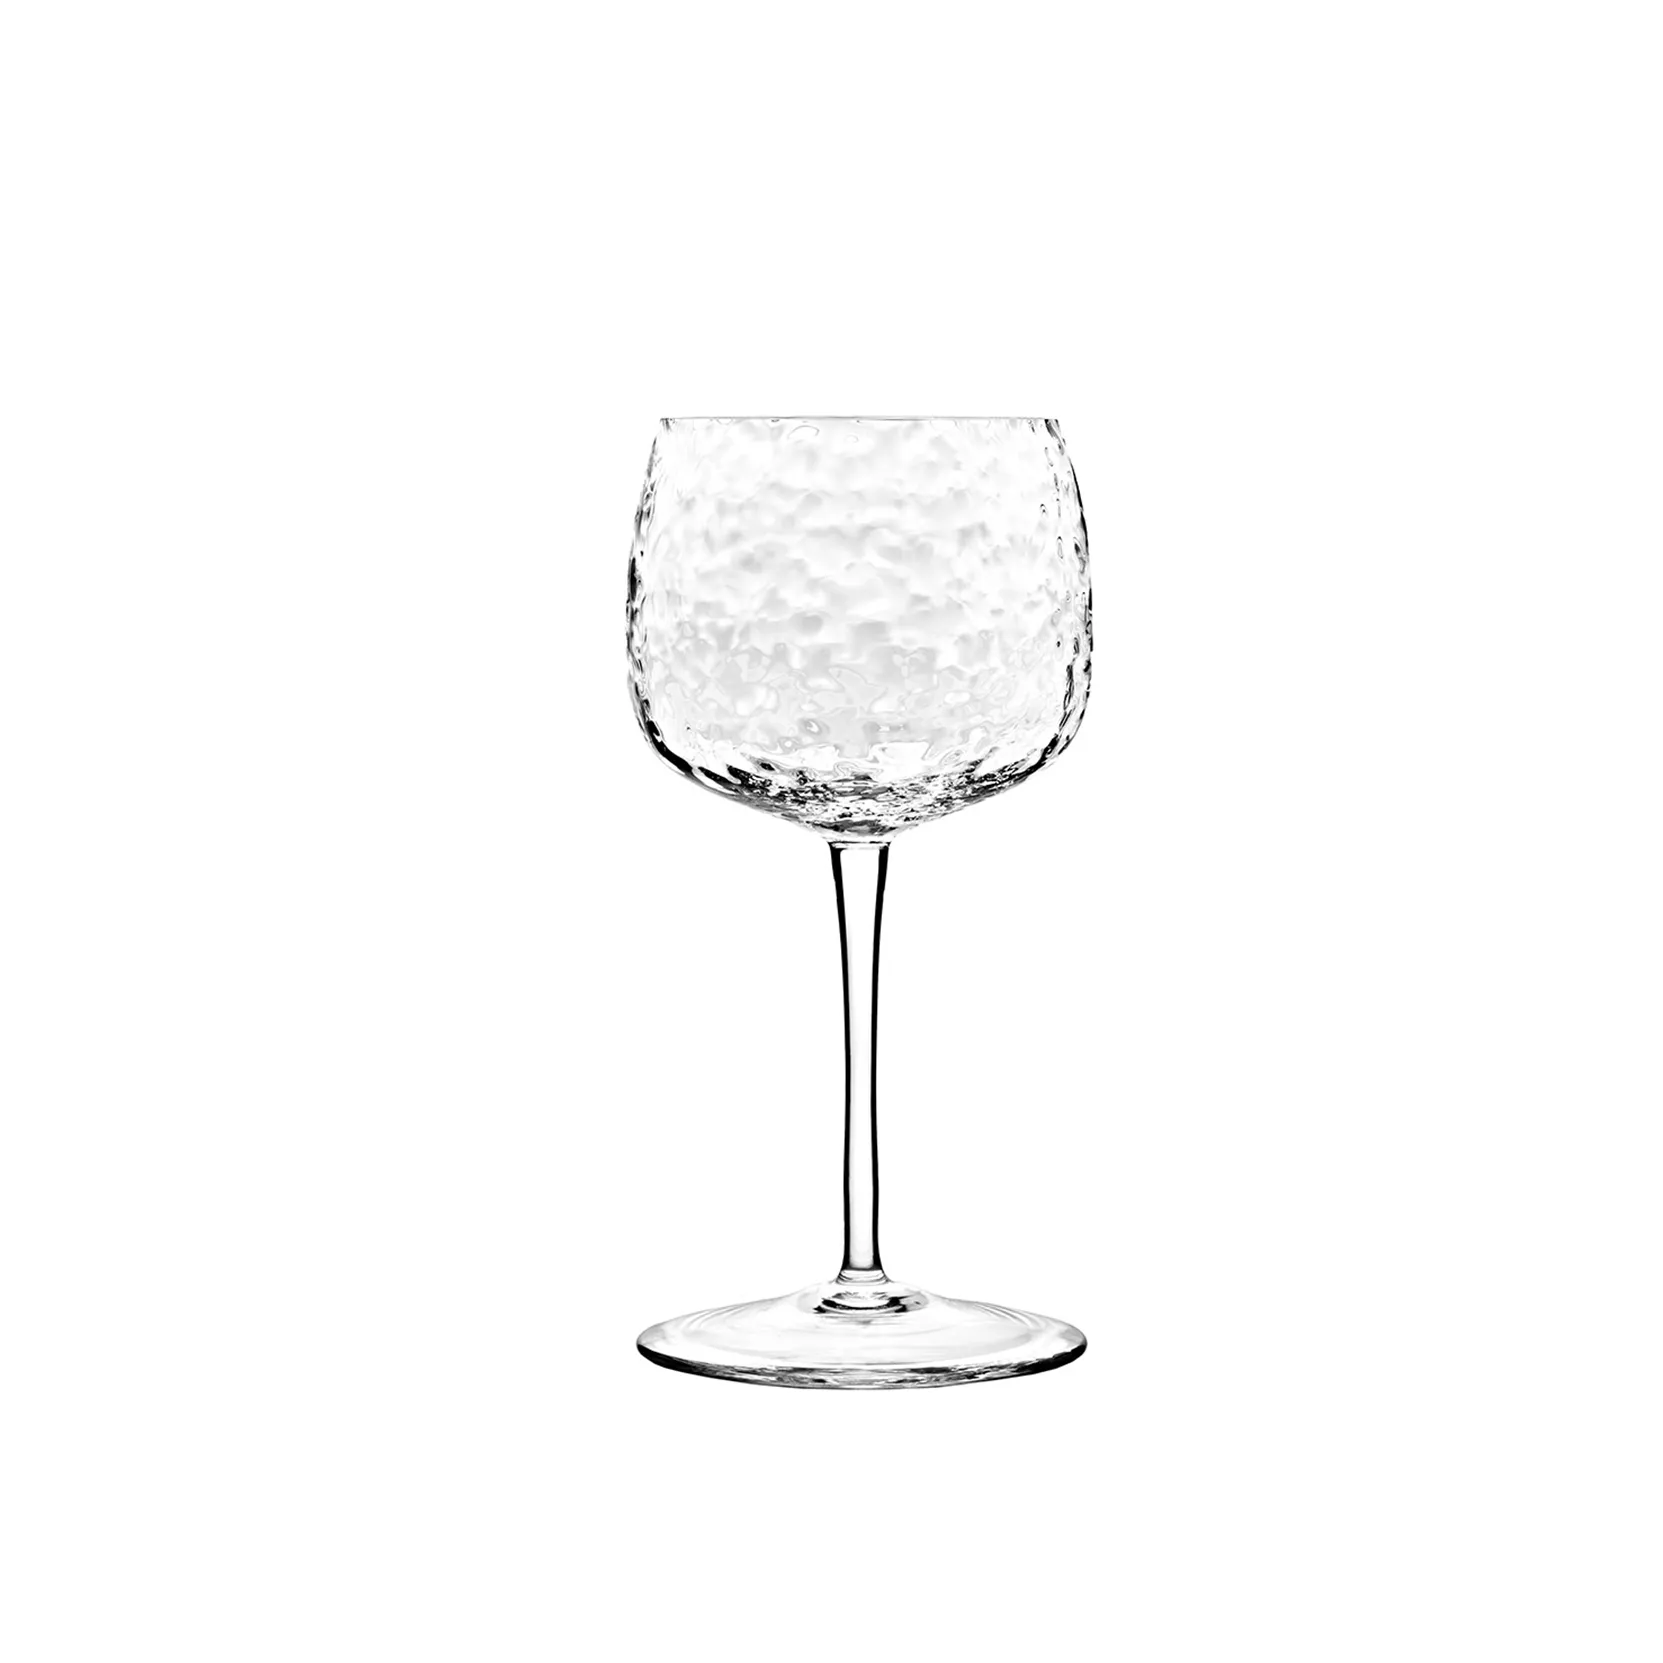 https://www.barthome.shop/84325-thickbox_default/set-of-6-goblets-covo-bei.jpg